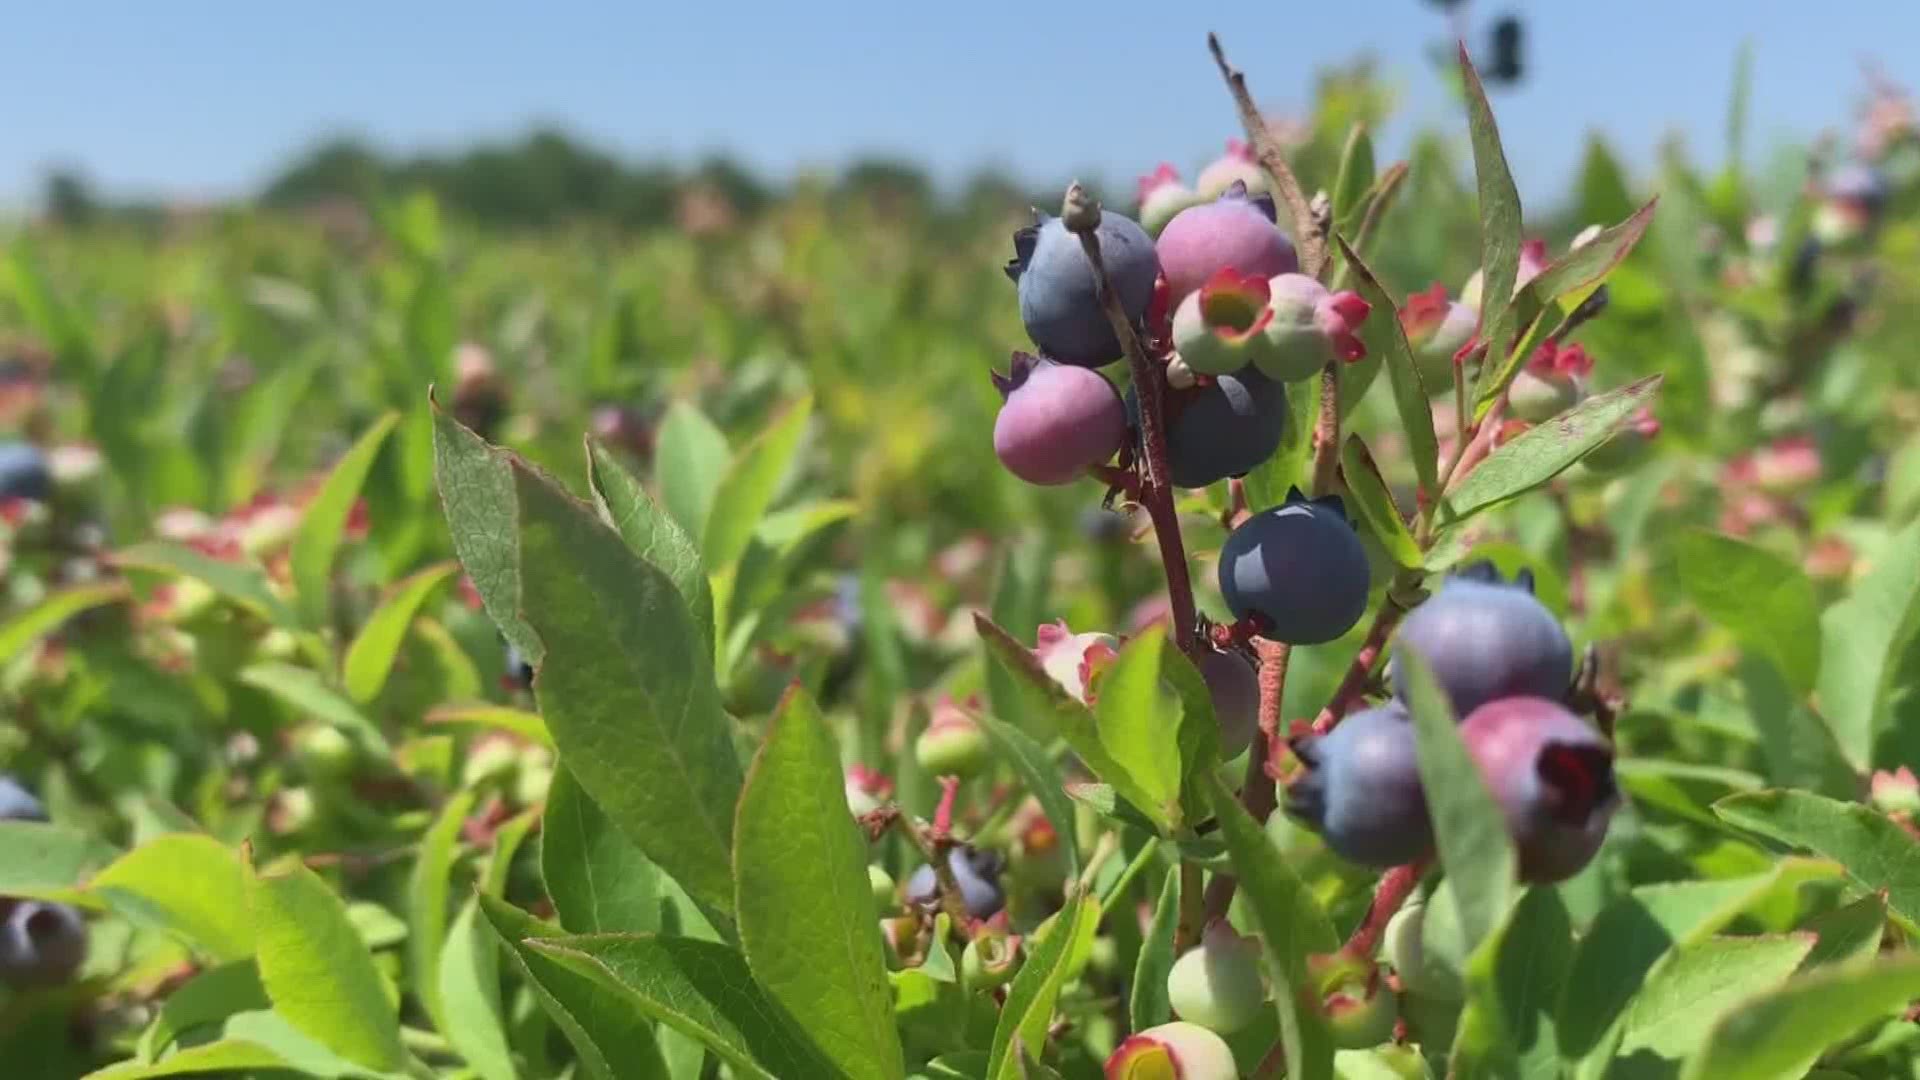 Alexander's Wild Maine Blueberries finds ways to navigate the Covid-19 pandemic during the summer season.